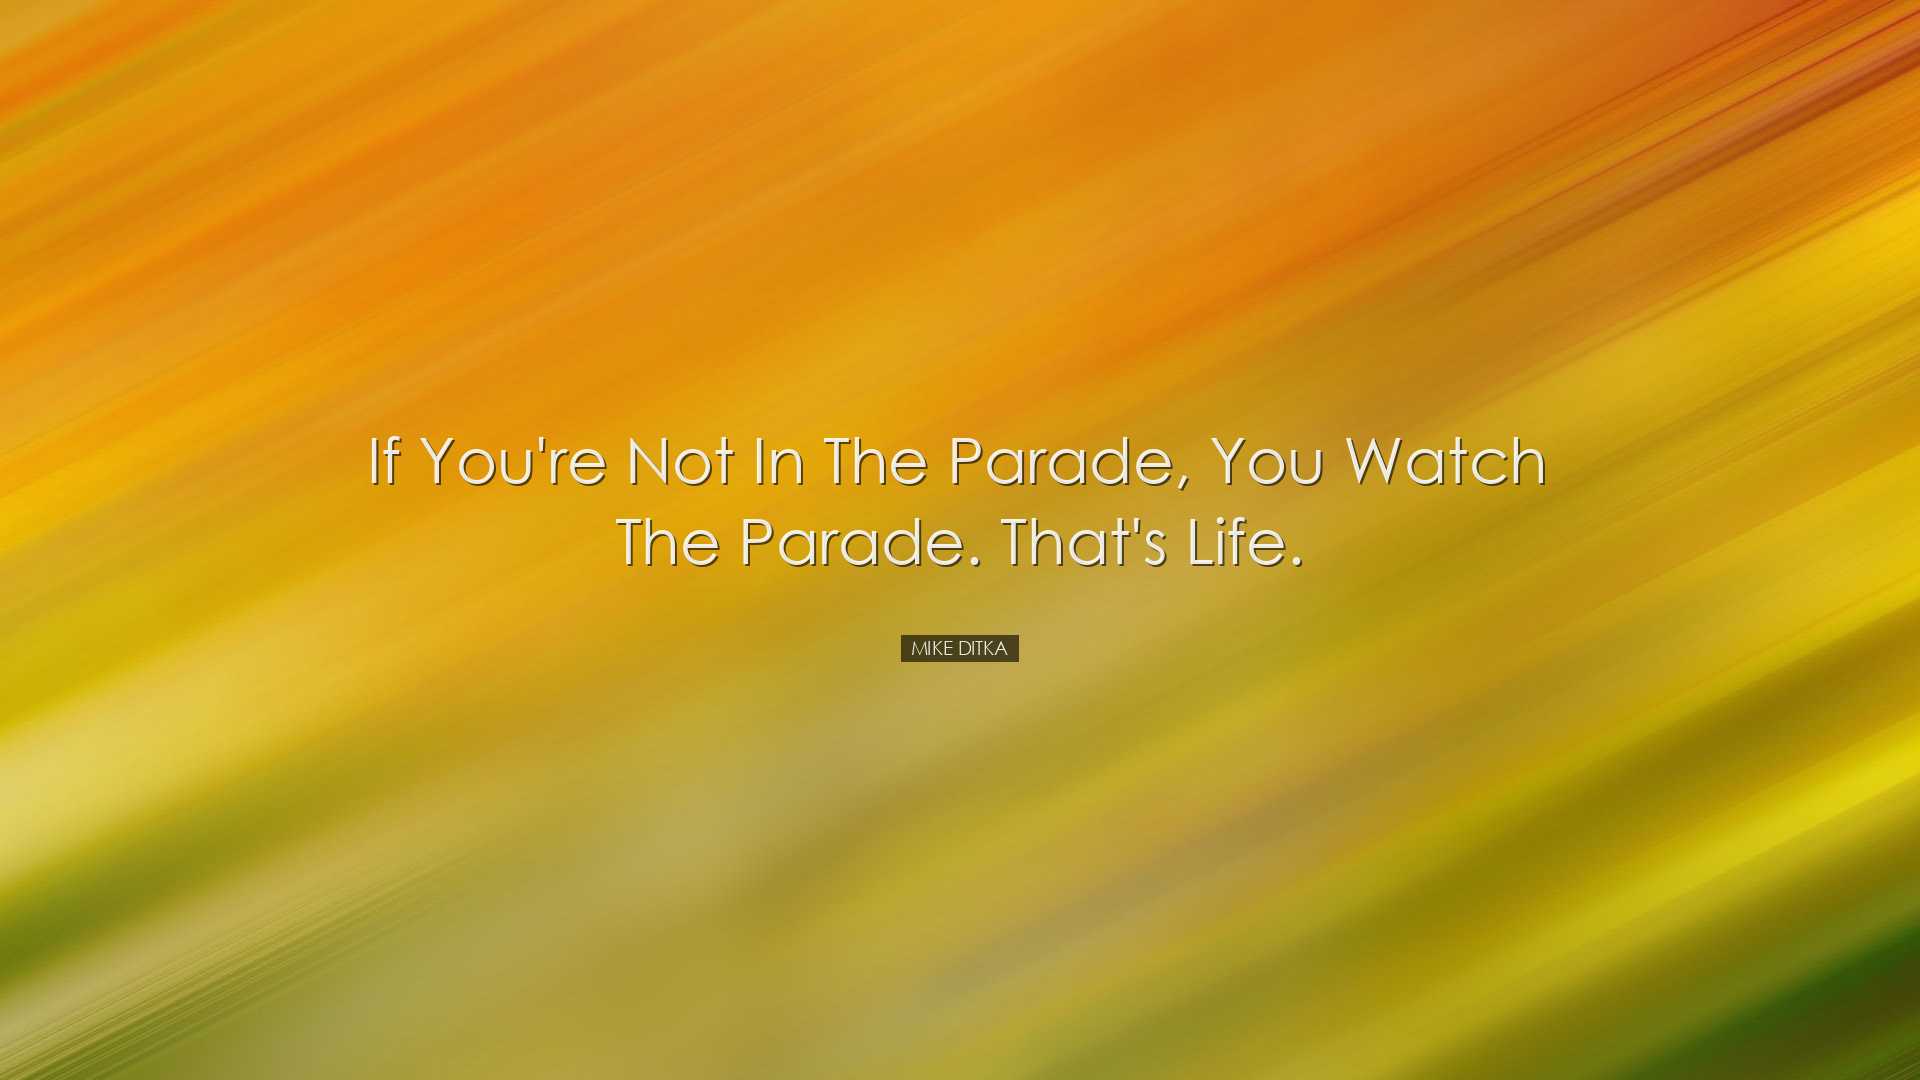 If you're not in the parade, you watch the parade. That's life. -